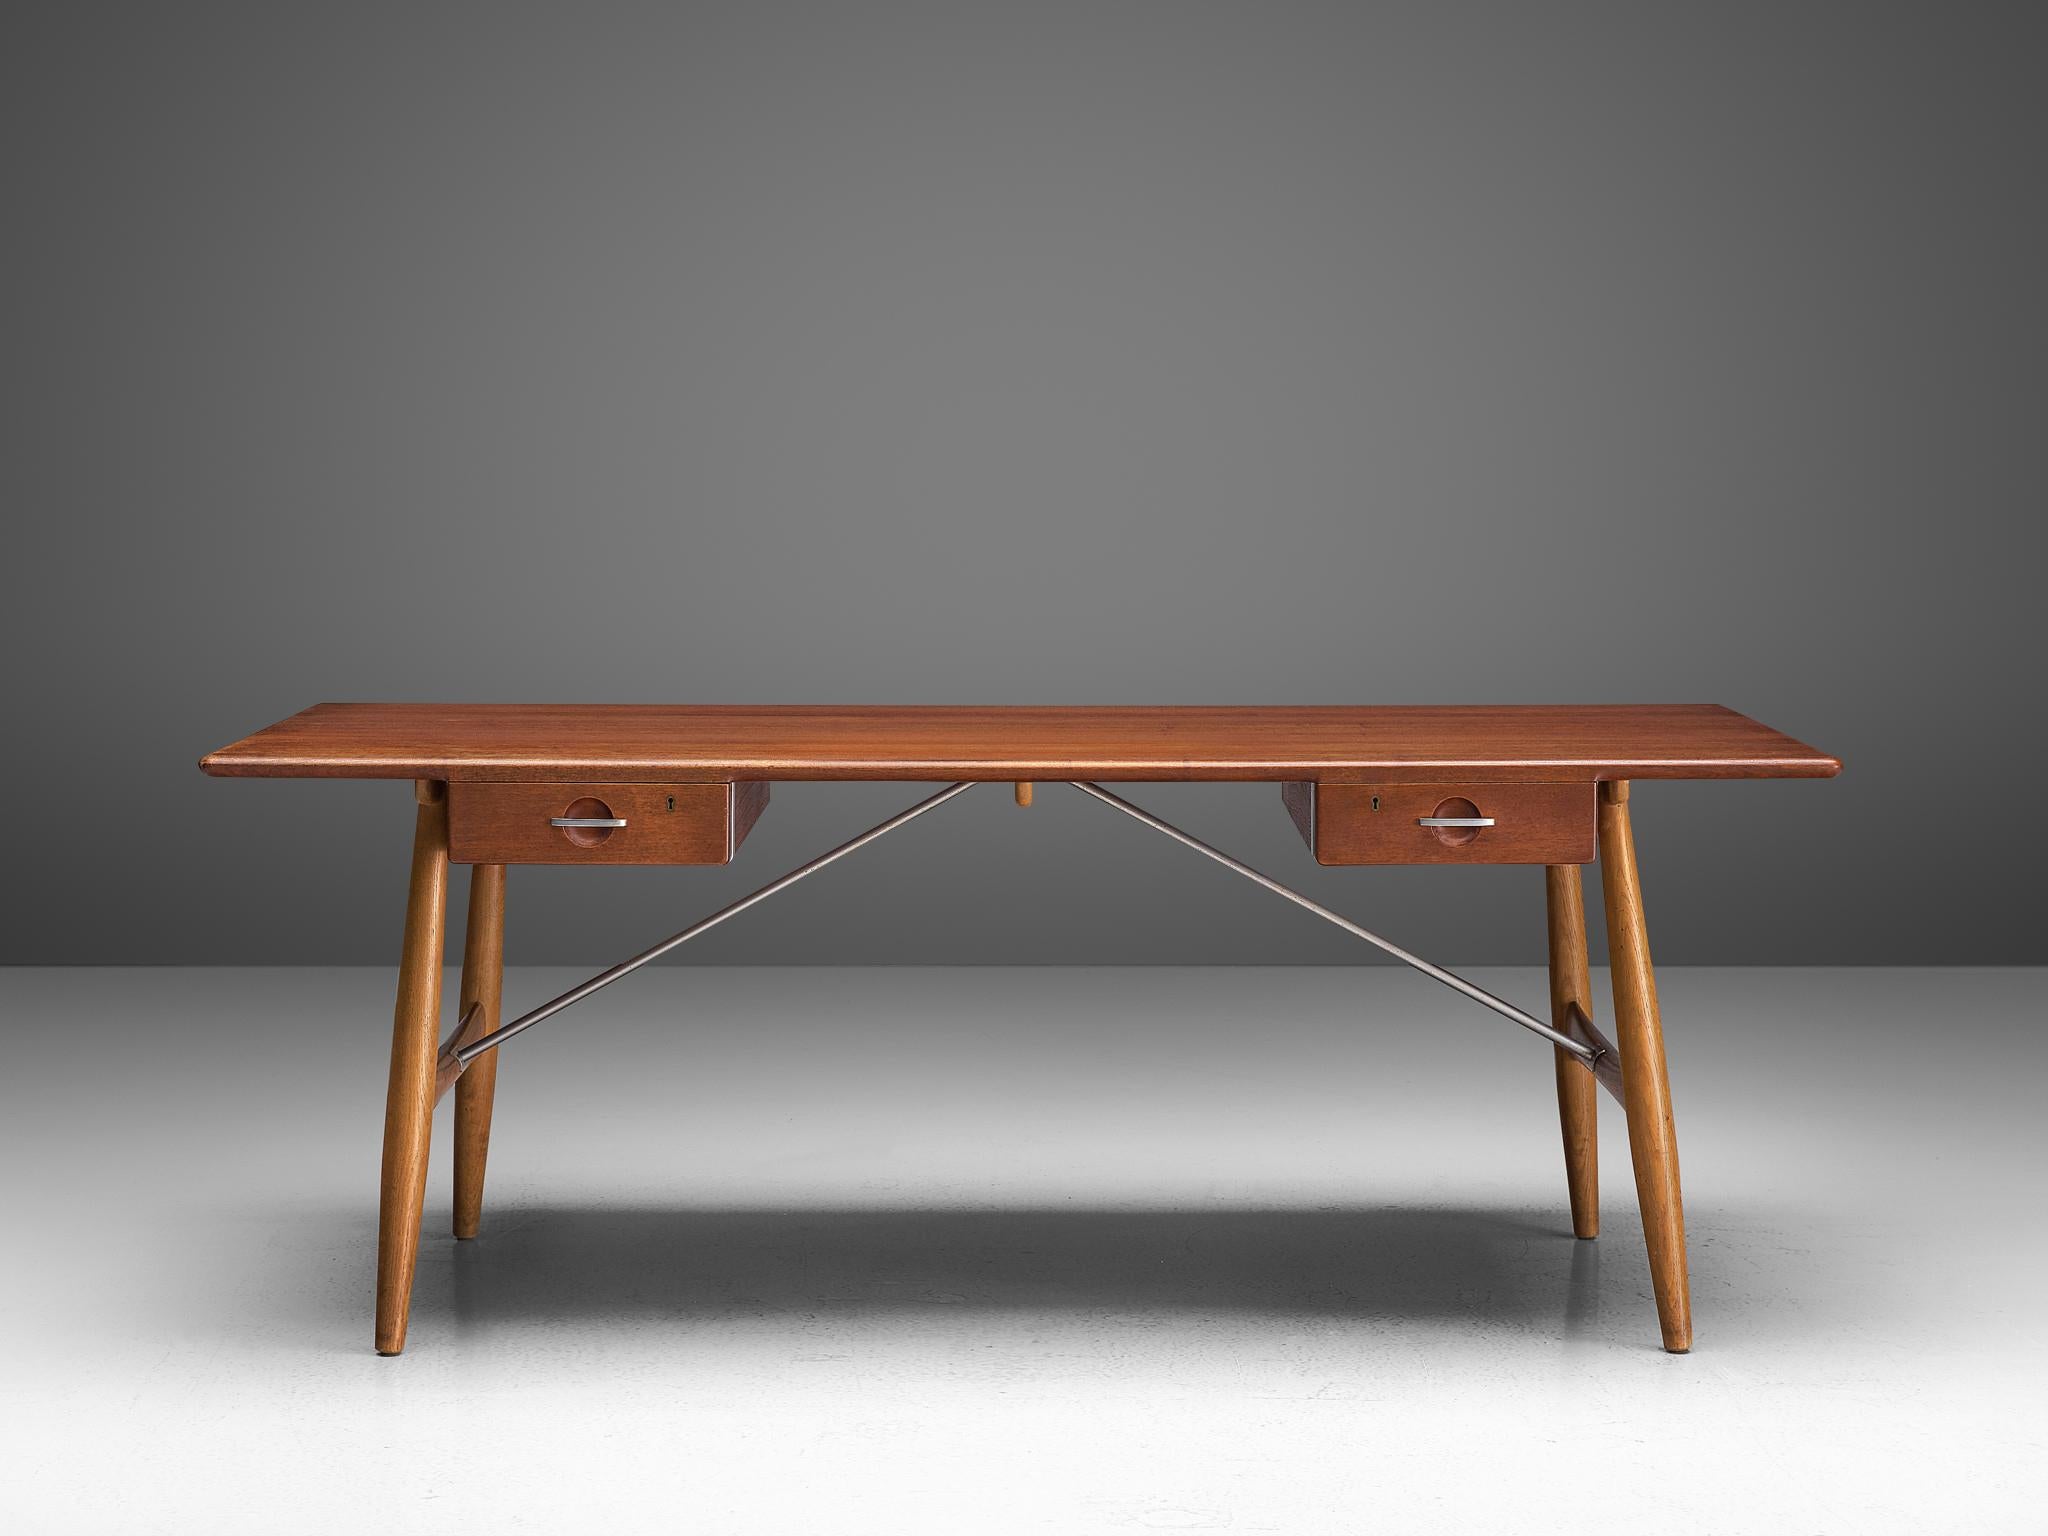 Hans J. Wegner for Johannes Hansen, desk JH571, teak, oak, metal, Denmark, design 1953

Out of all the desks that Wegner designed, the ‘JH571‘ is the most 'Wegnerian'. This is mostly due to the boldly angled legs that are being held in place by